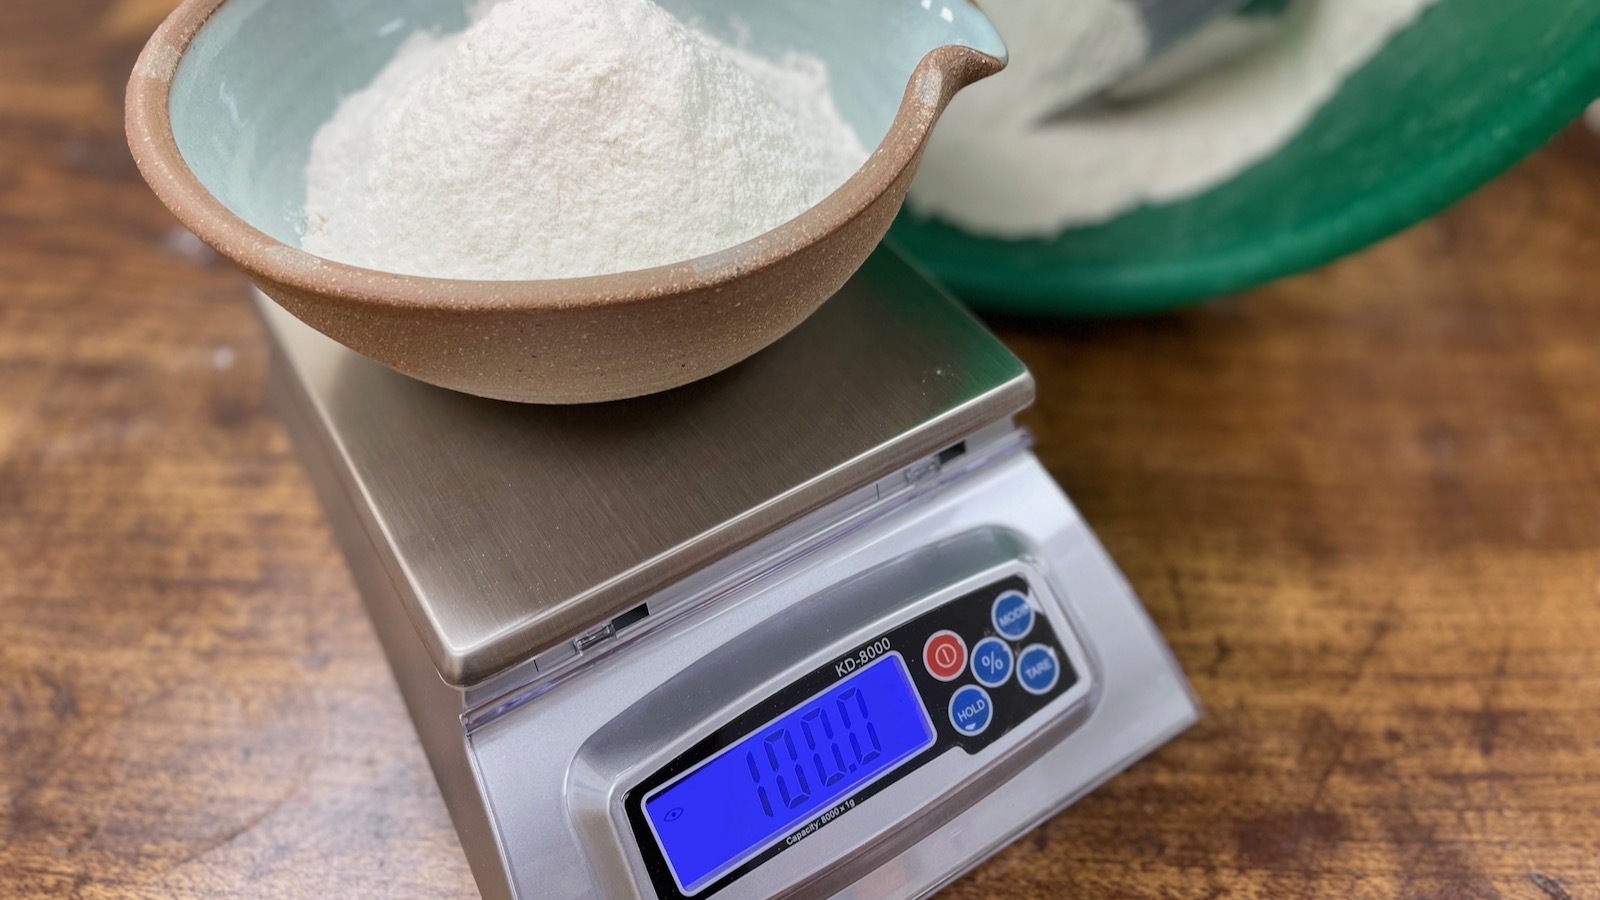 The Ultimate Home Bakers Scales? My Review of the MY Weigh KD-8000 Digital  Scales 